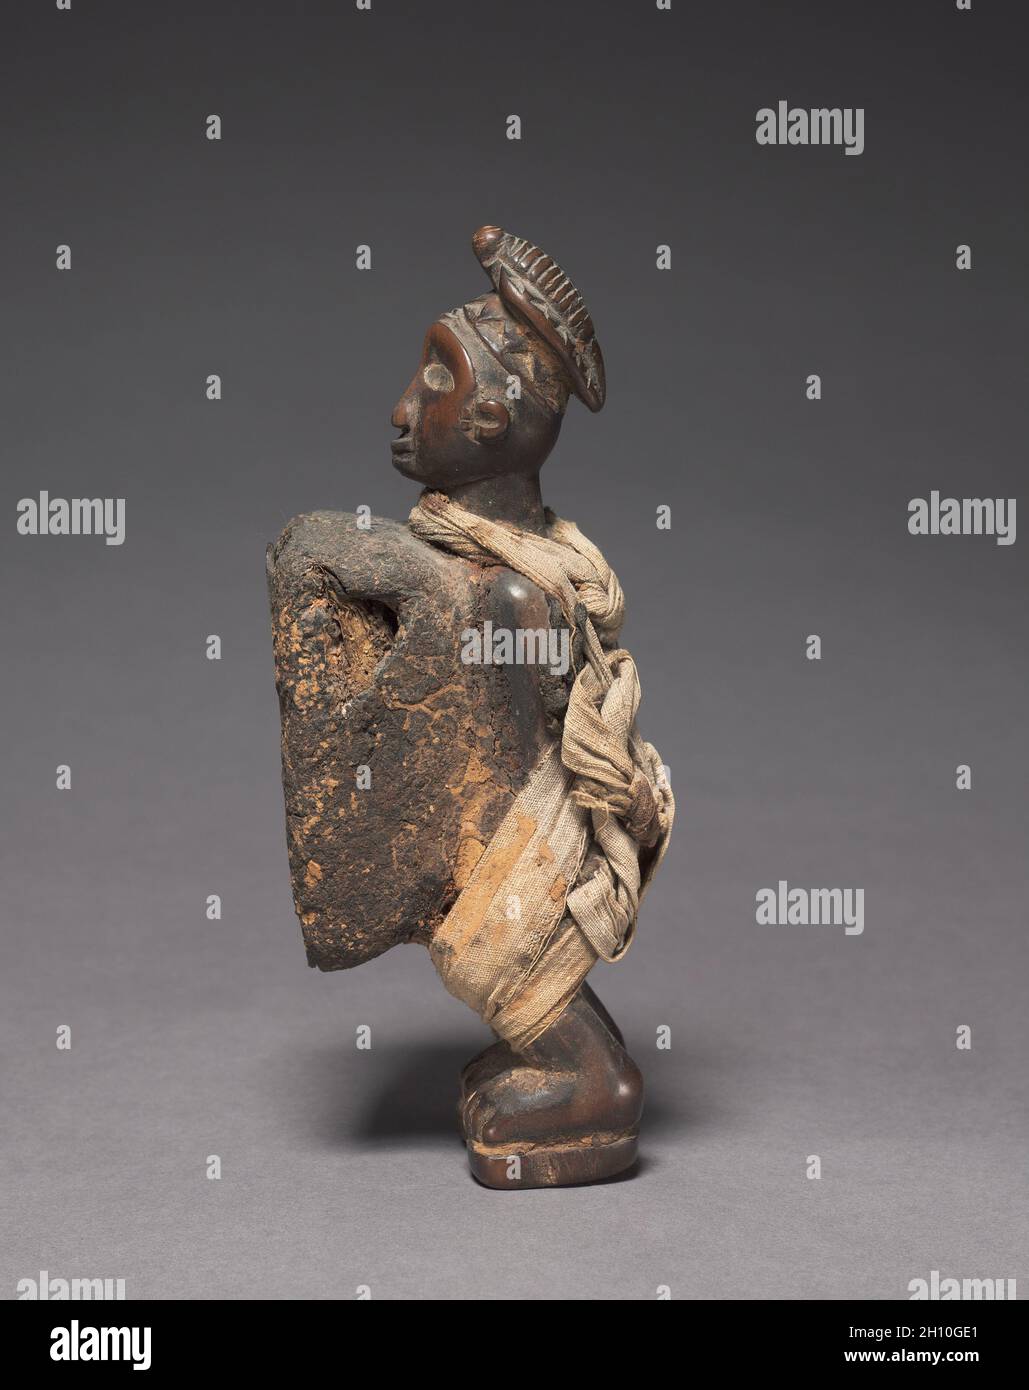 Male Figure (nkisi), late 1800s-early 1900s. Africa, Central Africa, Democratic Republic of Congo (most likely), Cabinda, or Republic of the Congo, probably Yombe-style maker. Wood, organic material (including resin), metalized glass, and cloth; overall: 17 x 5.3 x 7 cm (6 11/16 x 2 1/16 x 2 3/4 in.). Stock Photo